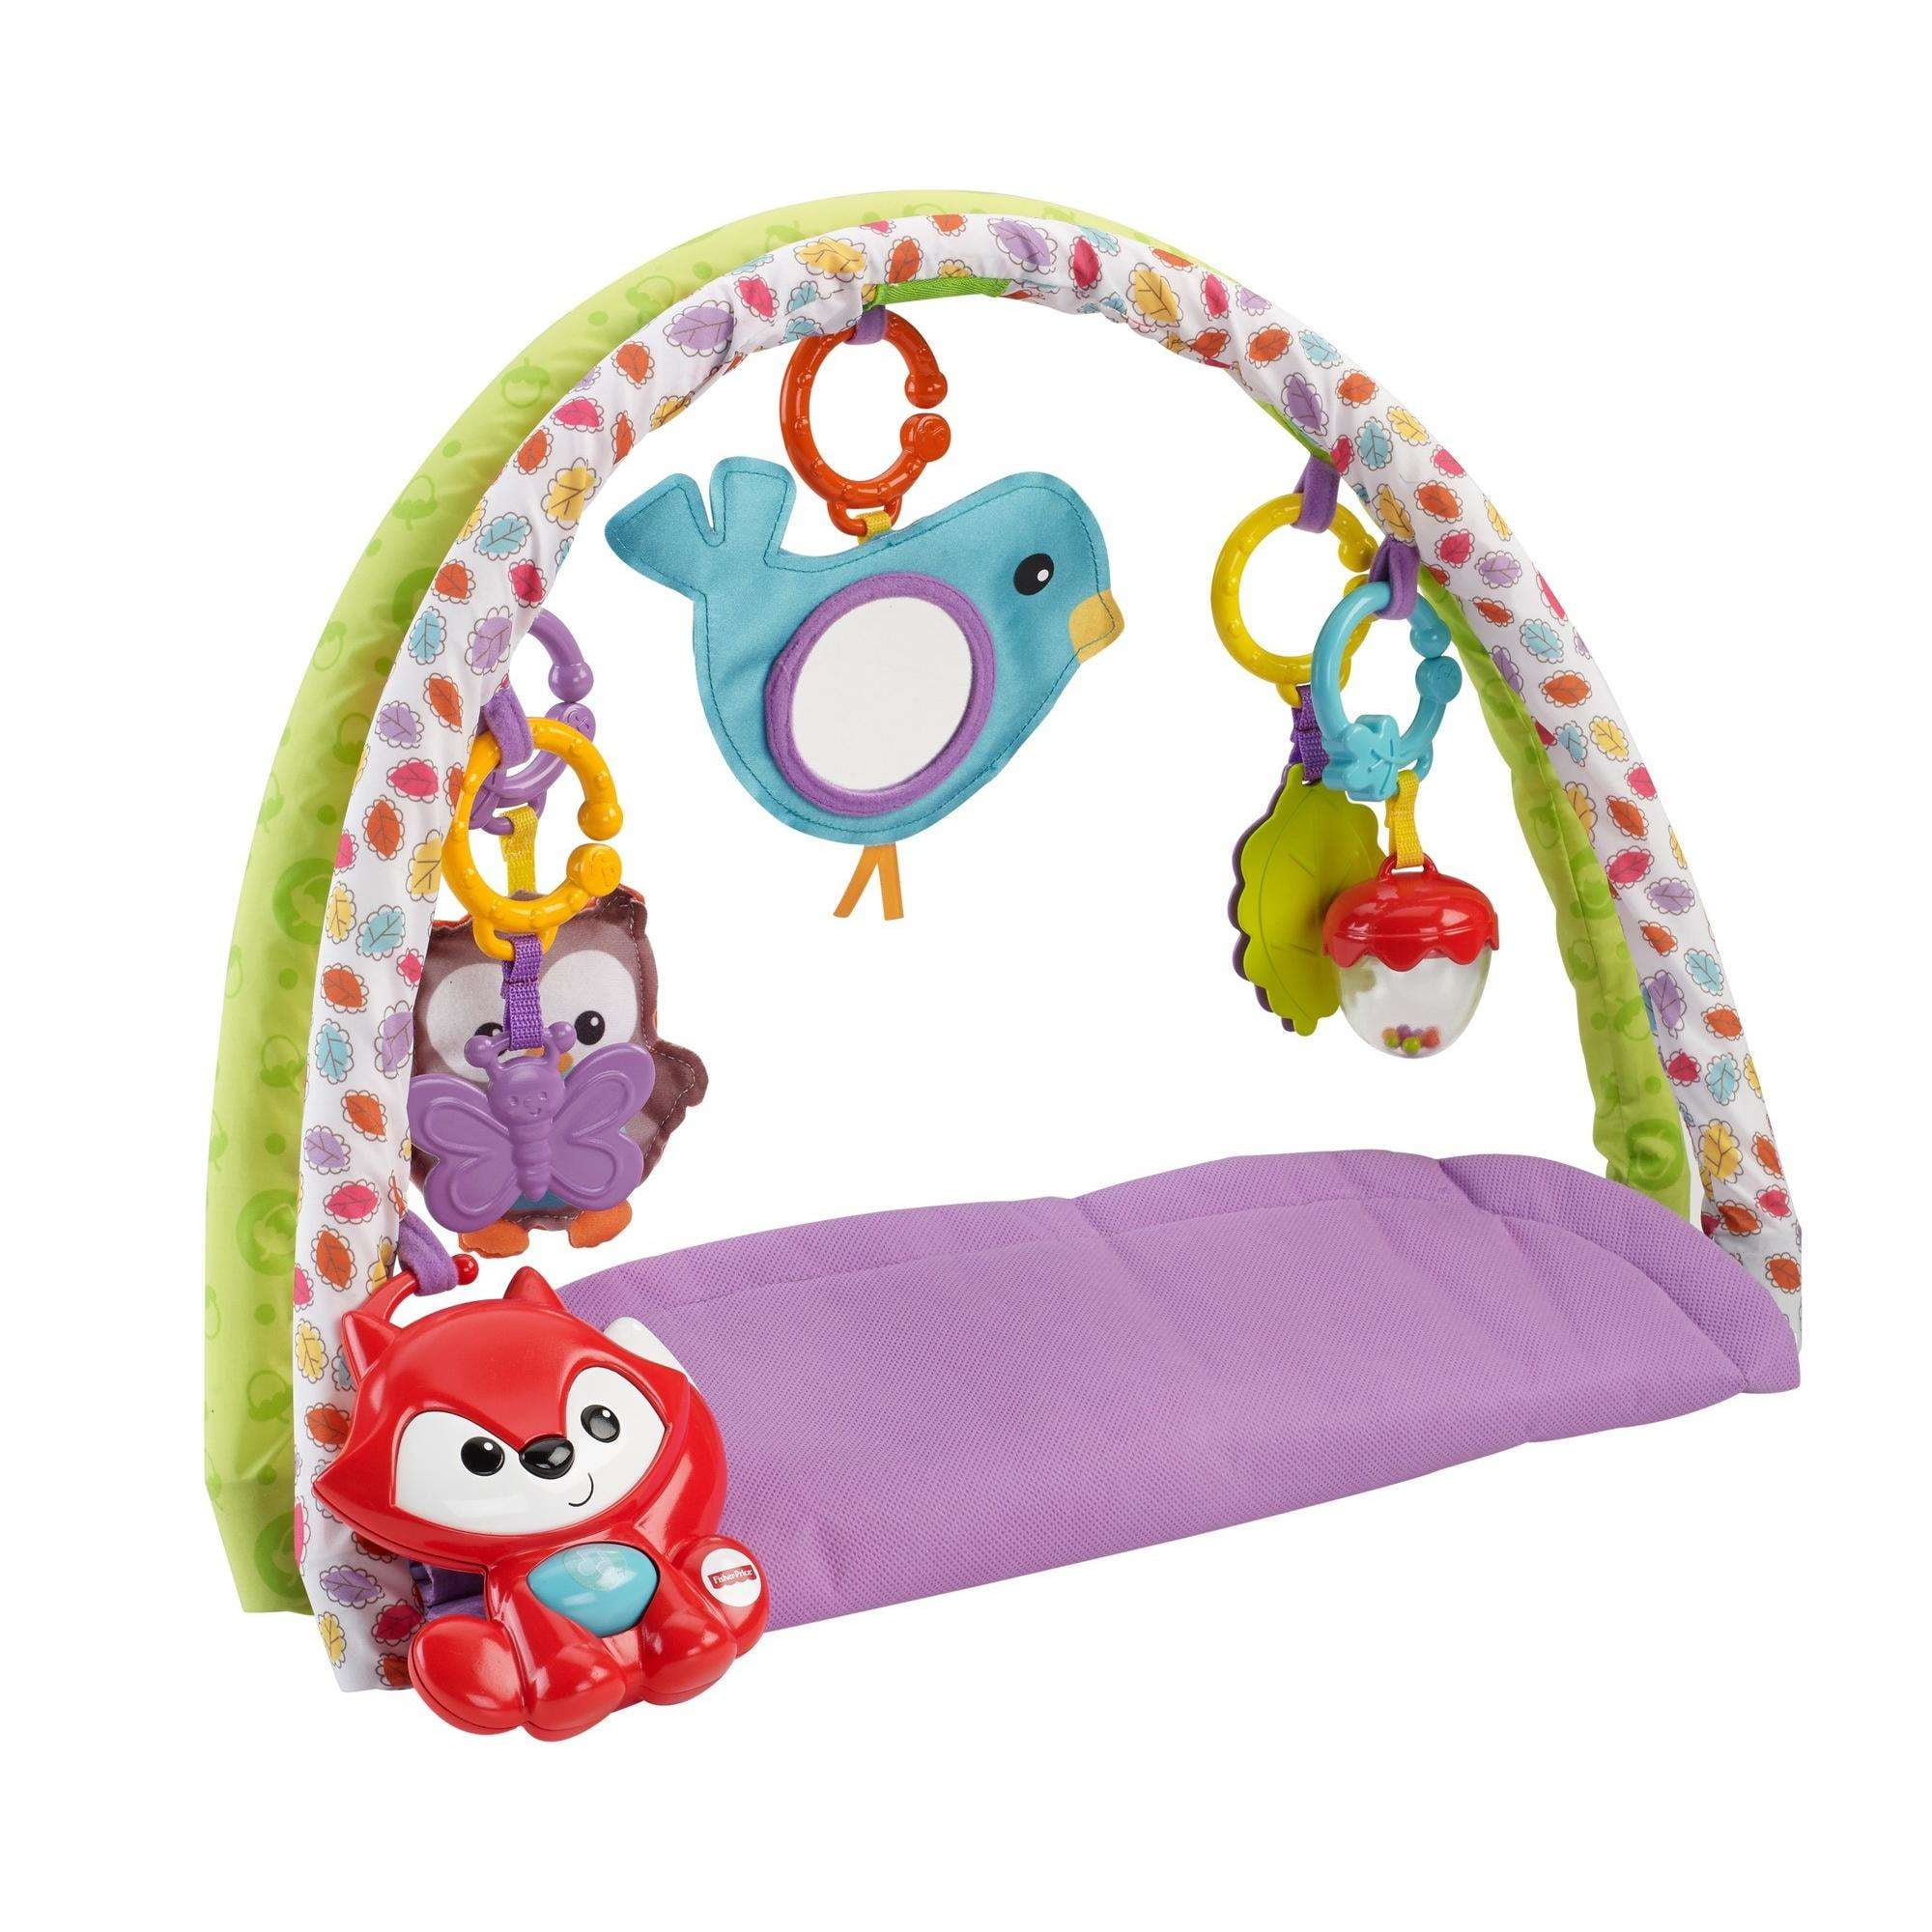 Fisher-Price 3-in-1 Musical Activity Gym Woodland